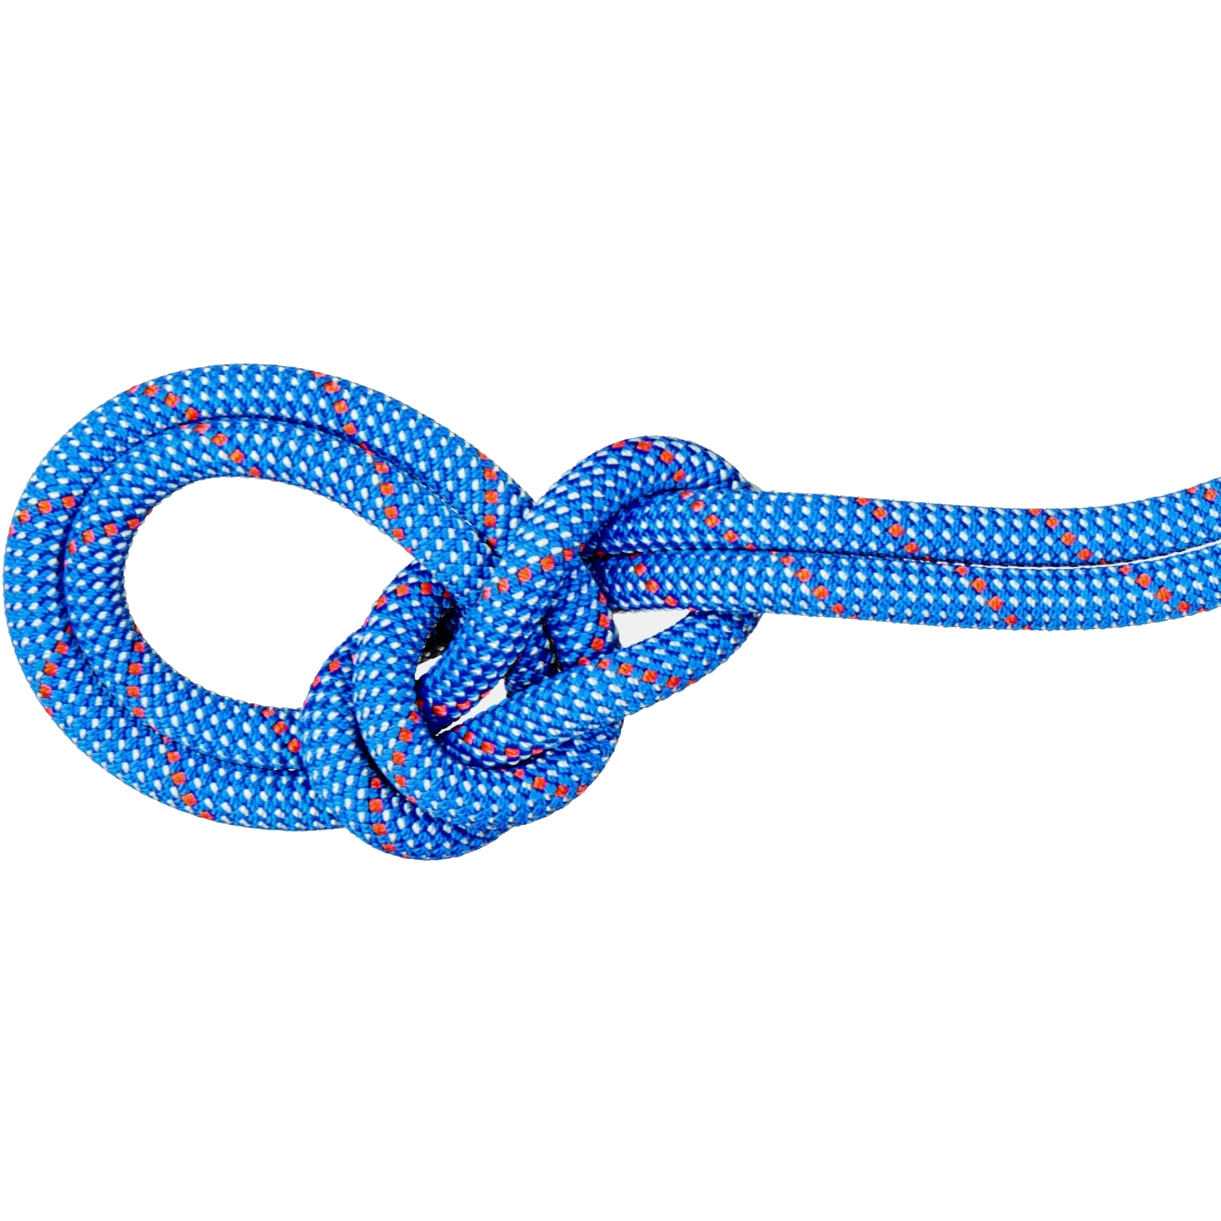 Picture of Mammut 9.5 Crag Classic Rope - 60m - blue-white